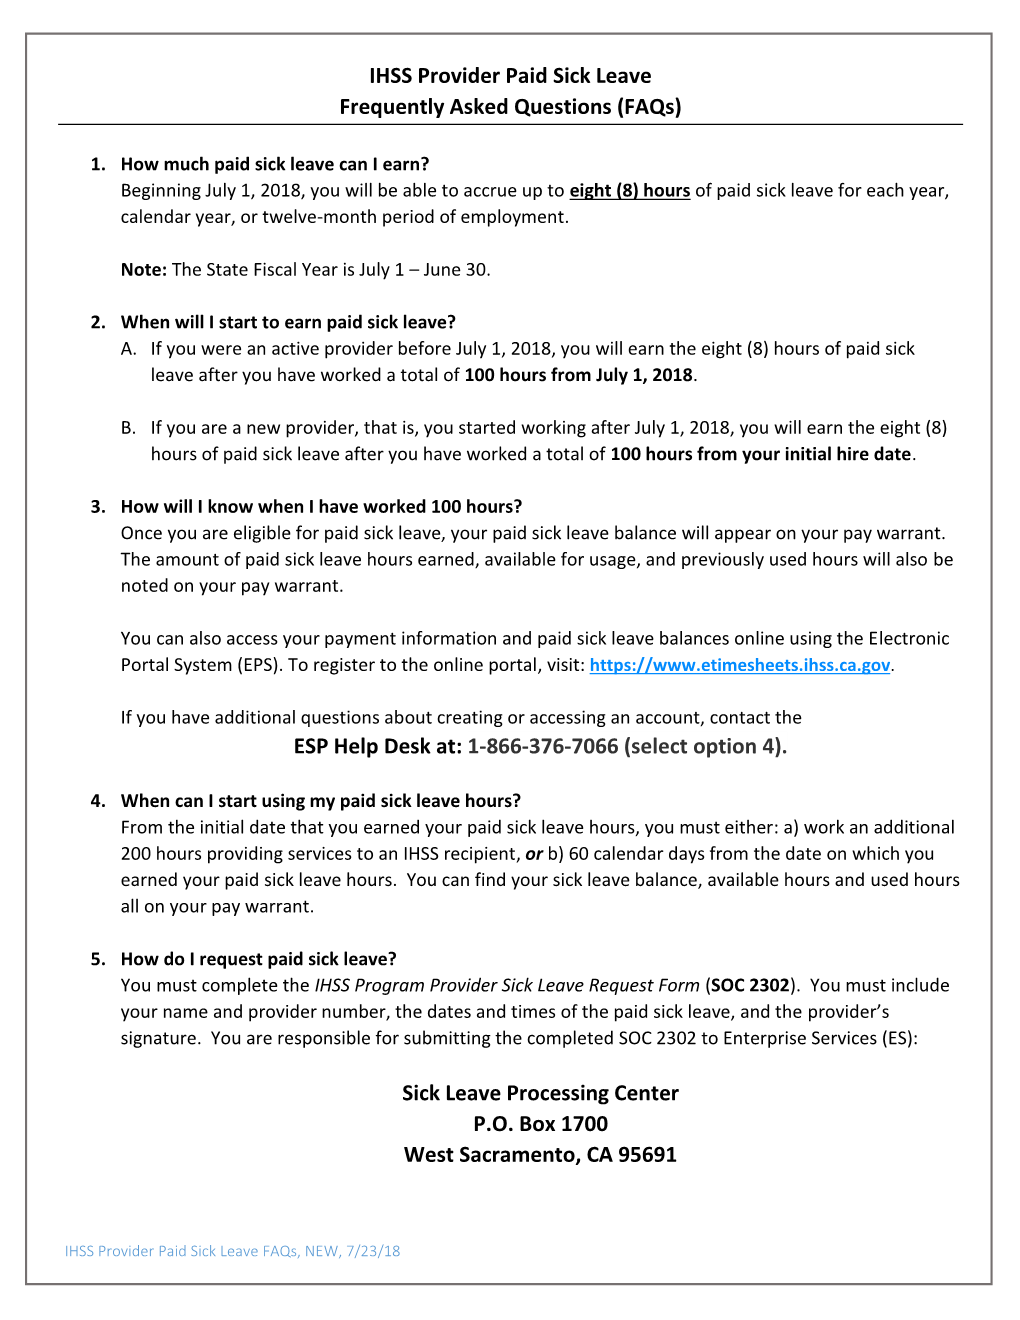 IHSS Provider Paid Sick Leave Frequently Asked Questions (Faqs) DocsLib